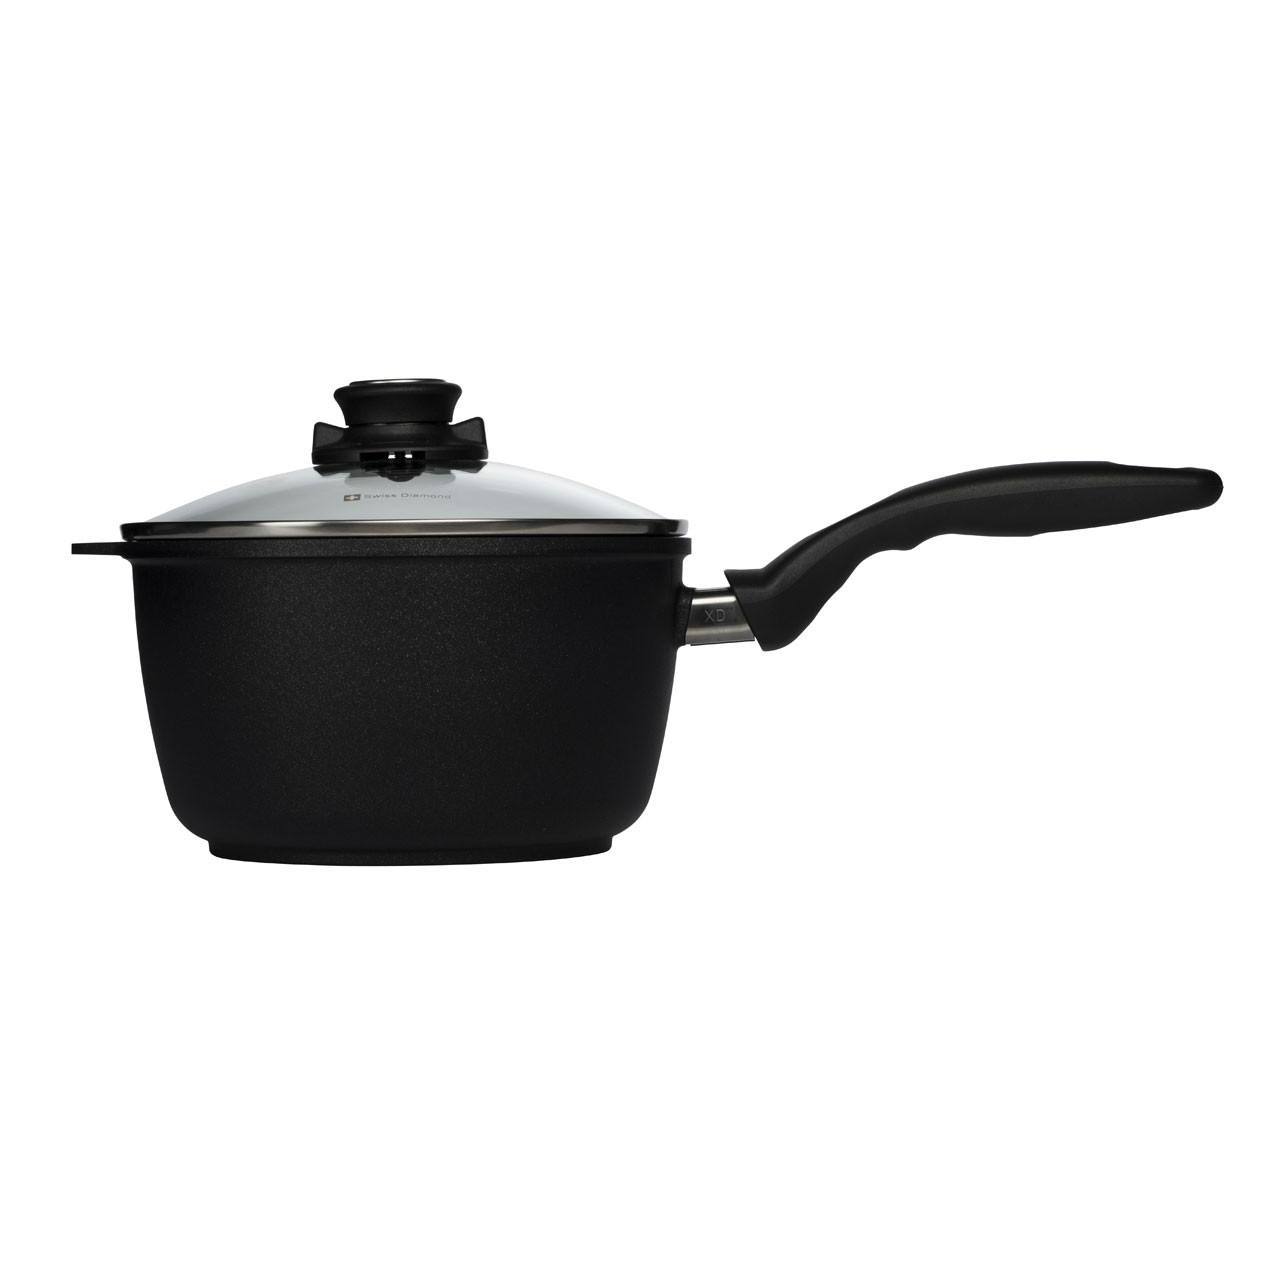 XD Sauce Pan with Lid - 8" 3.2 QT